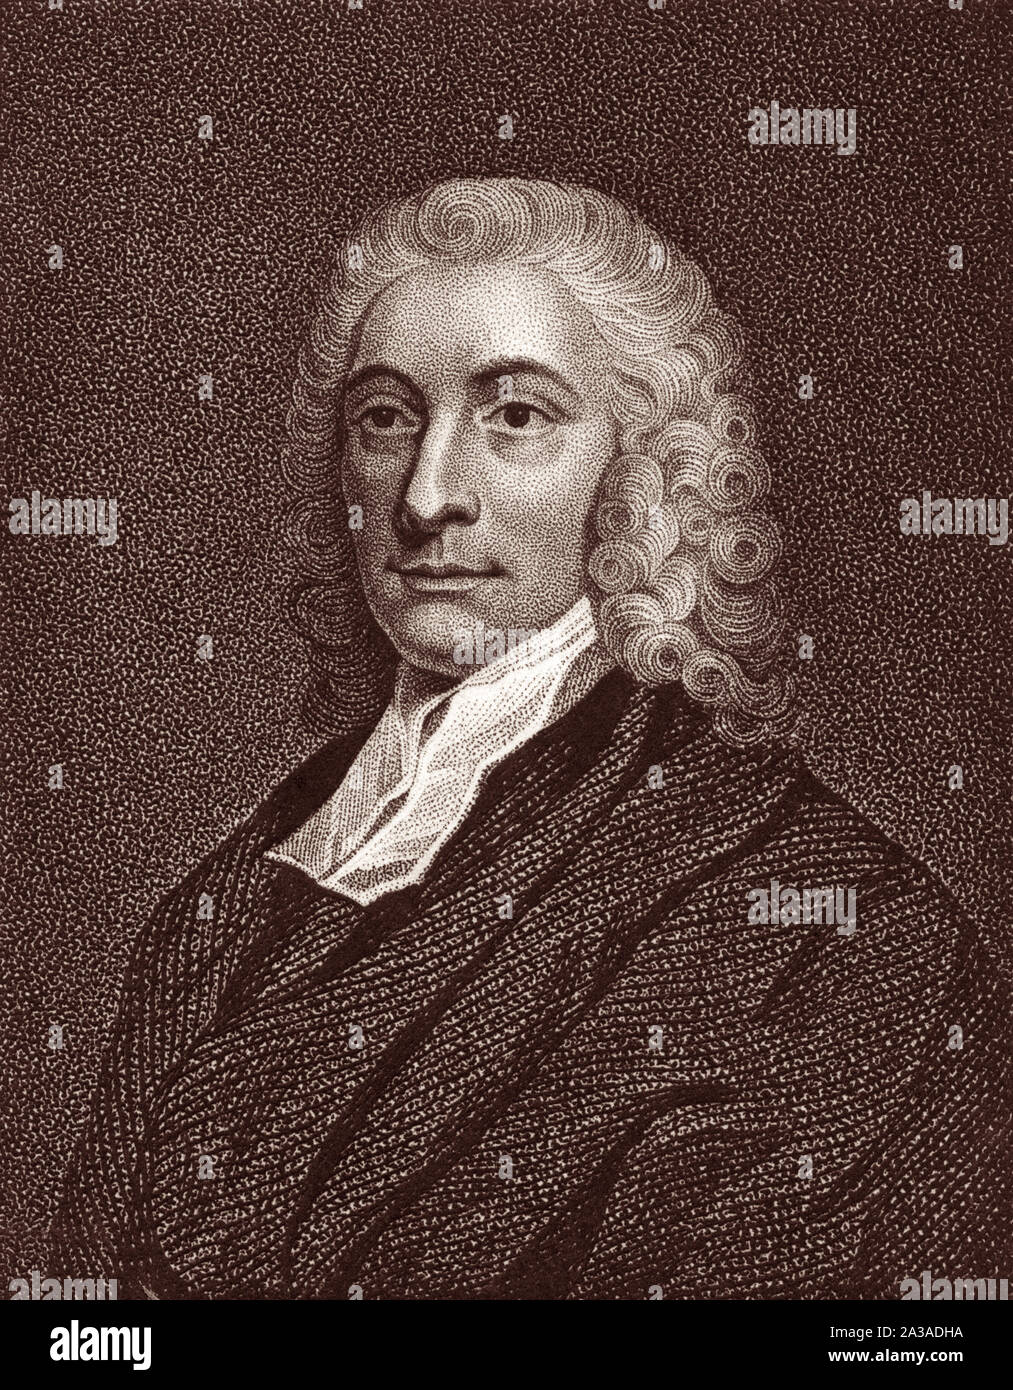 Philip Doddridge D.D. (1702–1751) was an evangelical English Nonconformist (Congregationalist) minister, educator, and prolific hymnwriter. Doddridge was a contemporary and friend of Isaac Watts, John Wesley and George Whitefield, and was an influence through his writing on William Wilberforce and Charles Spurgeon. Stock Photo